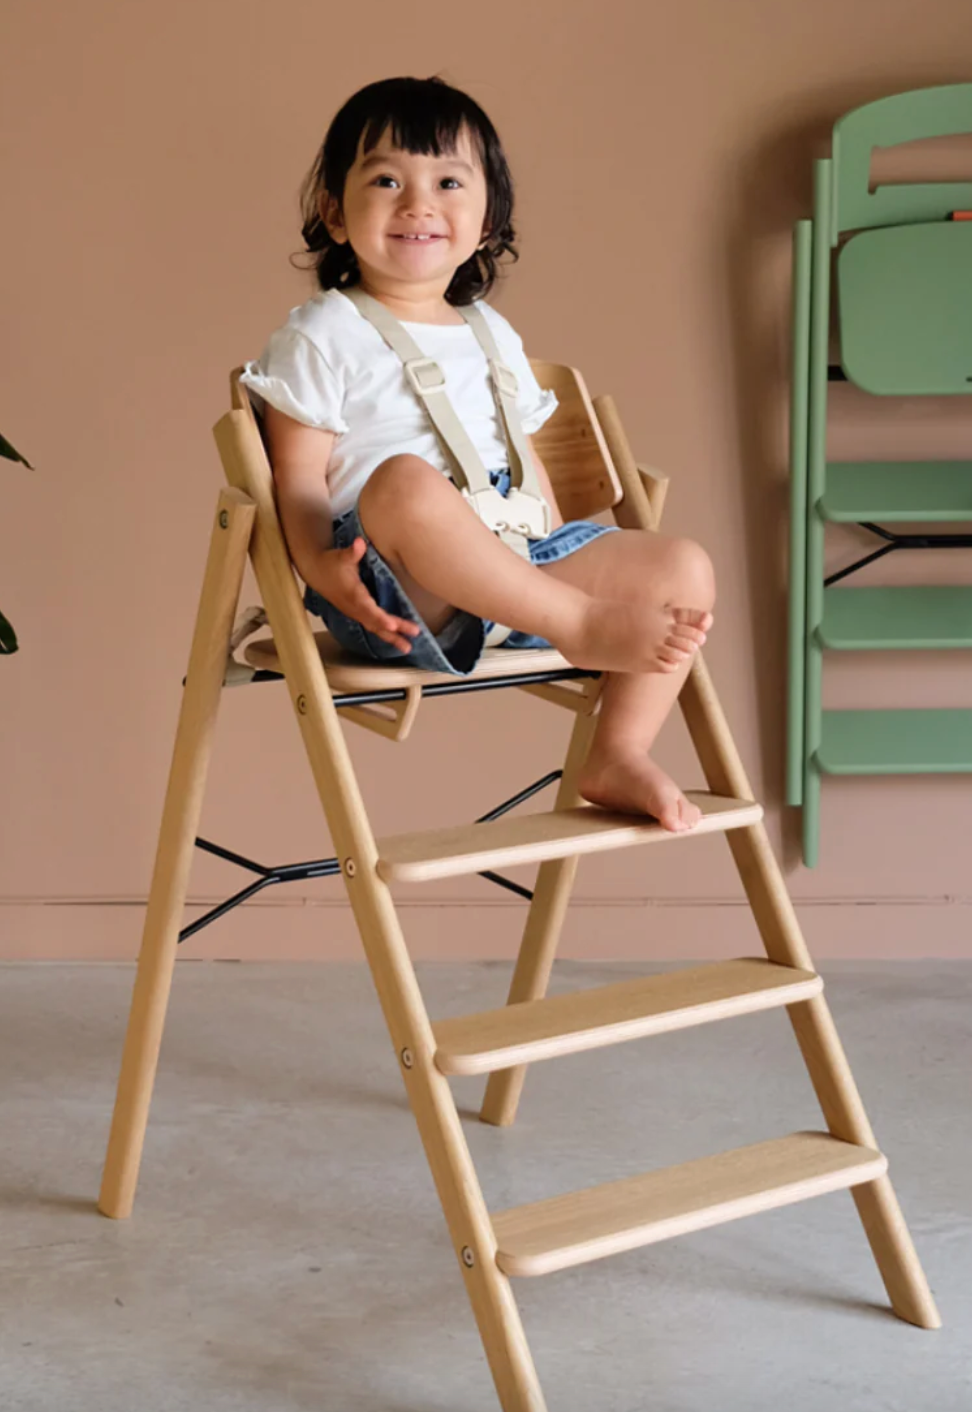 Bump up the comfort of your little one: Why we love the KAOS Klapp highchair